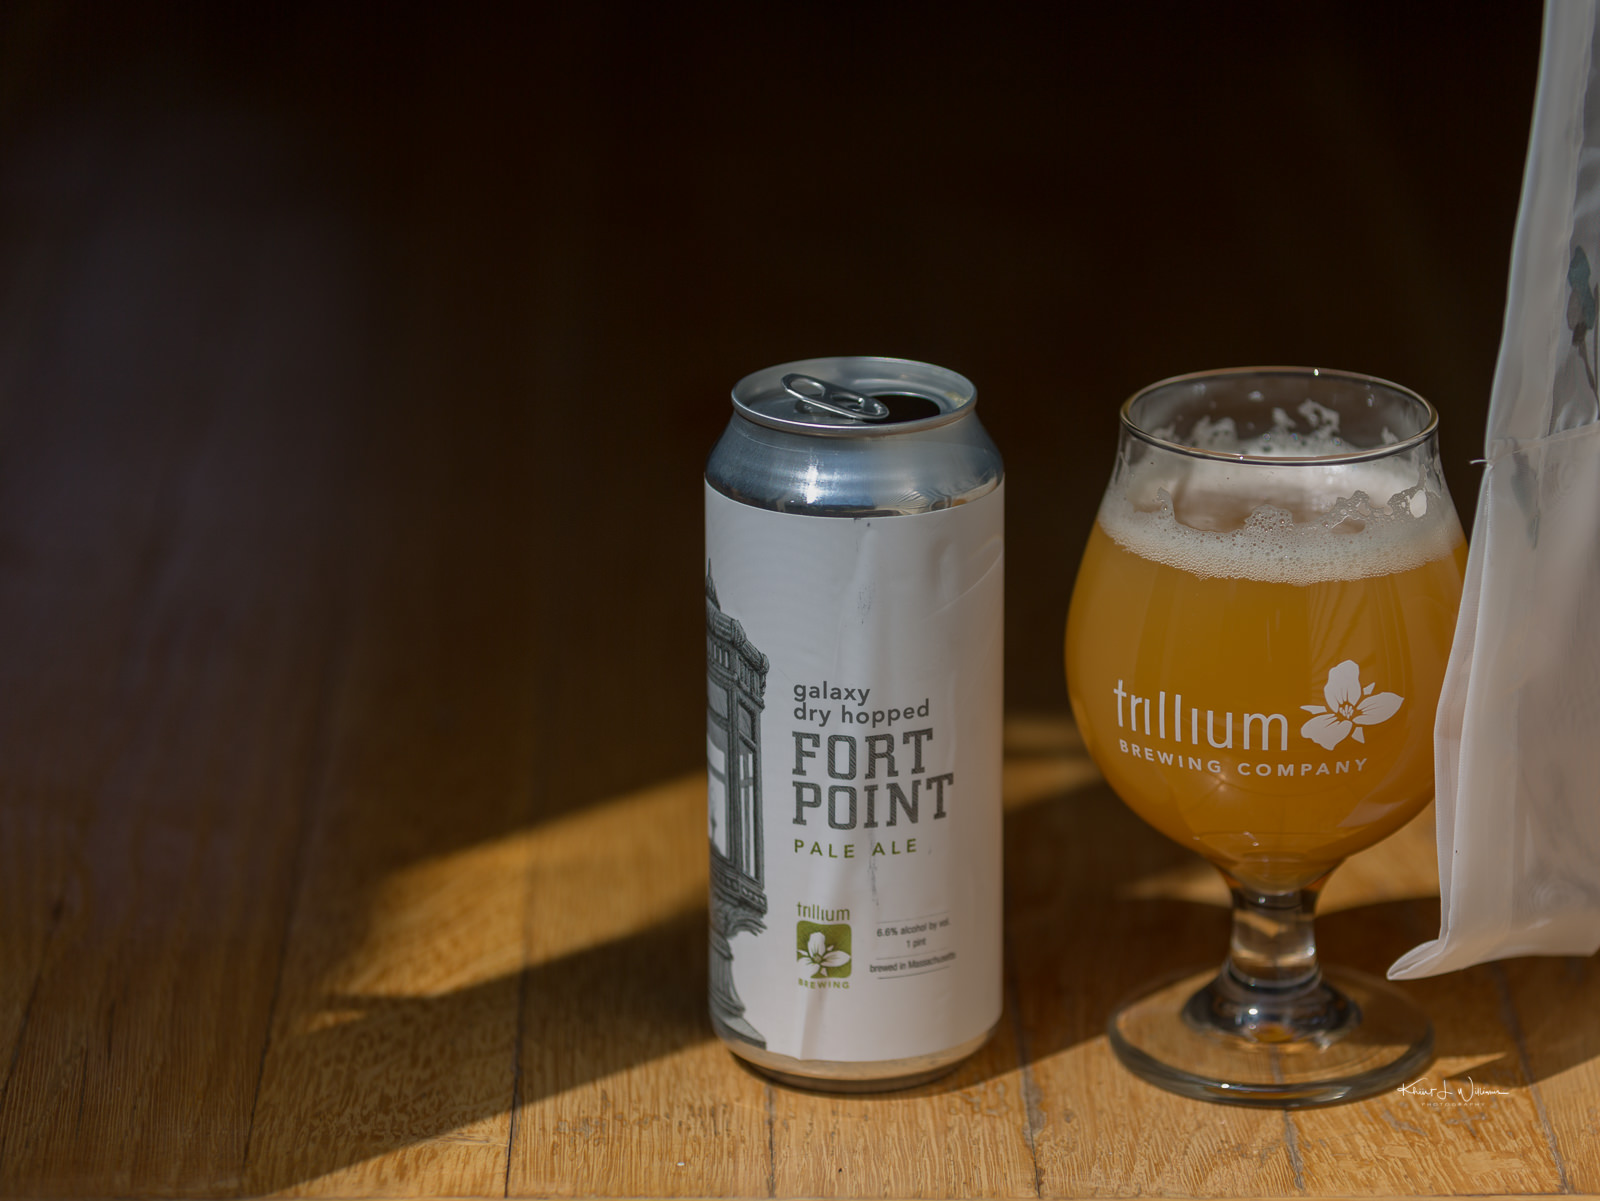 Trillium Brewing Company's Galaxy Dry Hopped Fort Point Pale Ale